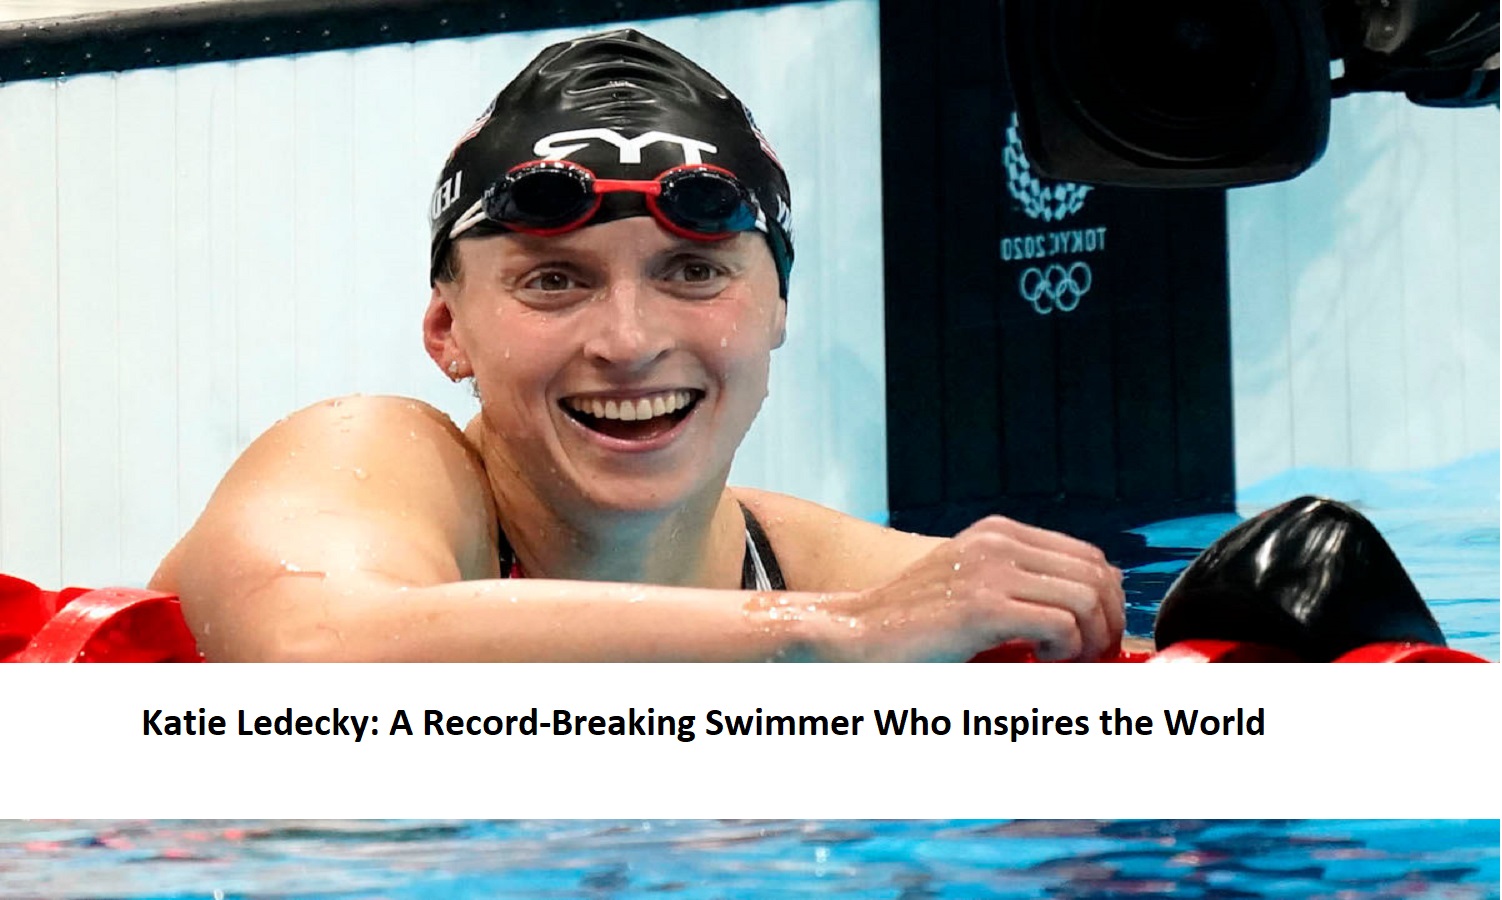 Katie Ledecky: A Record-Breaking Swimmer Who Inspires the World